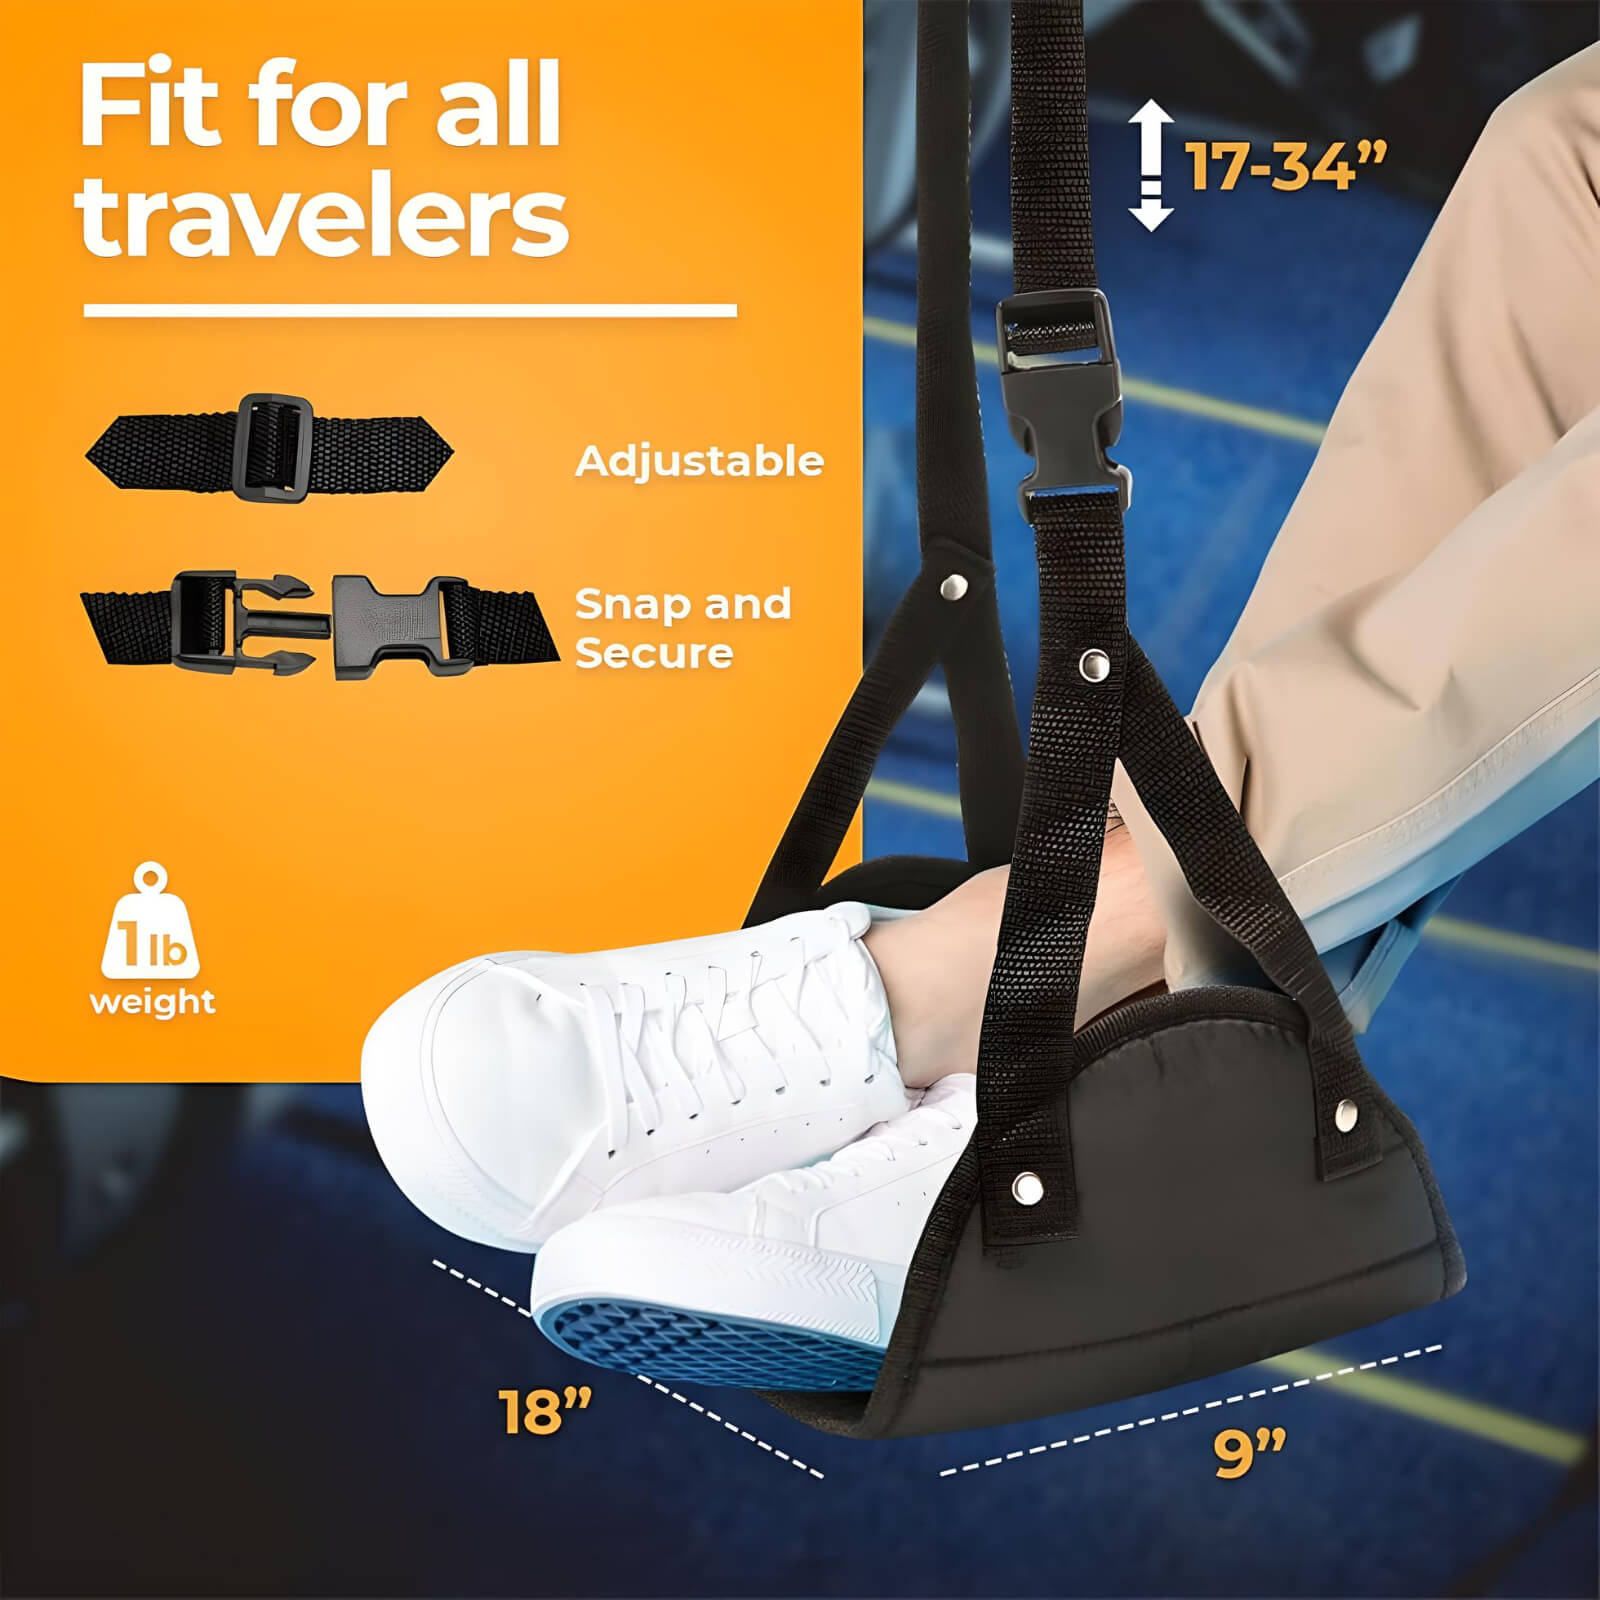 inflatable-foot-rest-fit-for-all-travelers